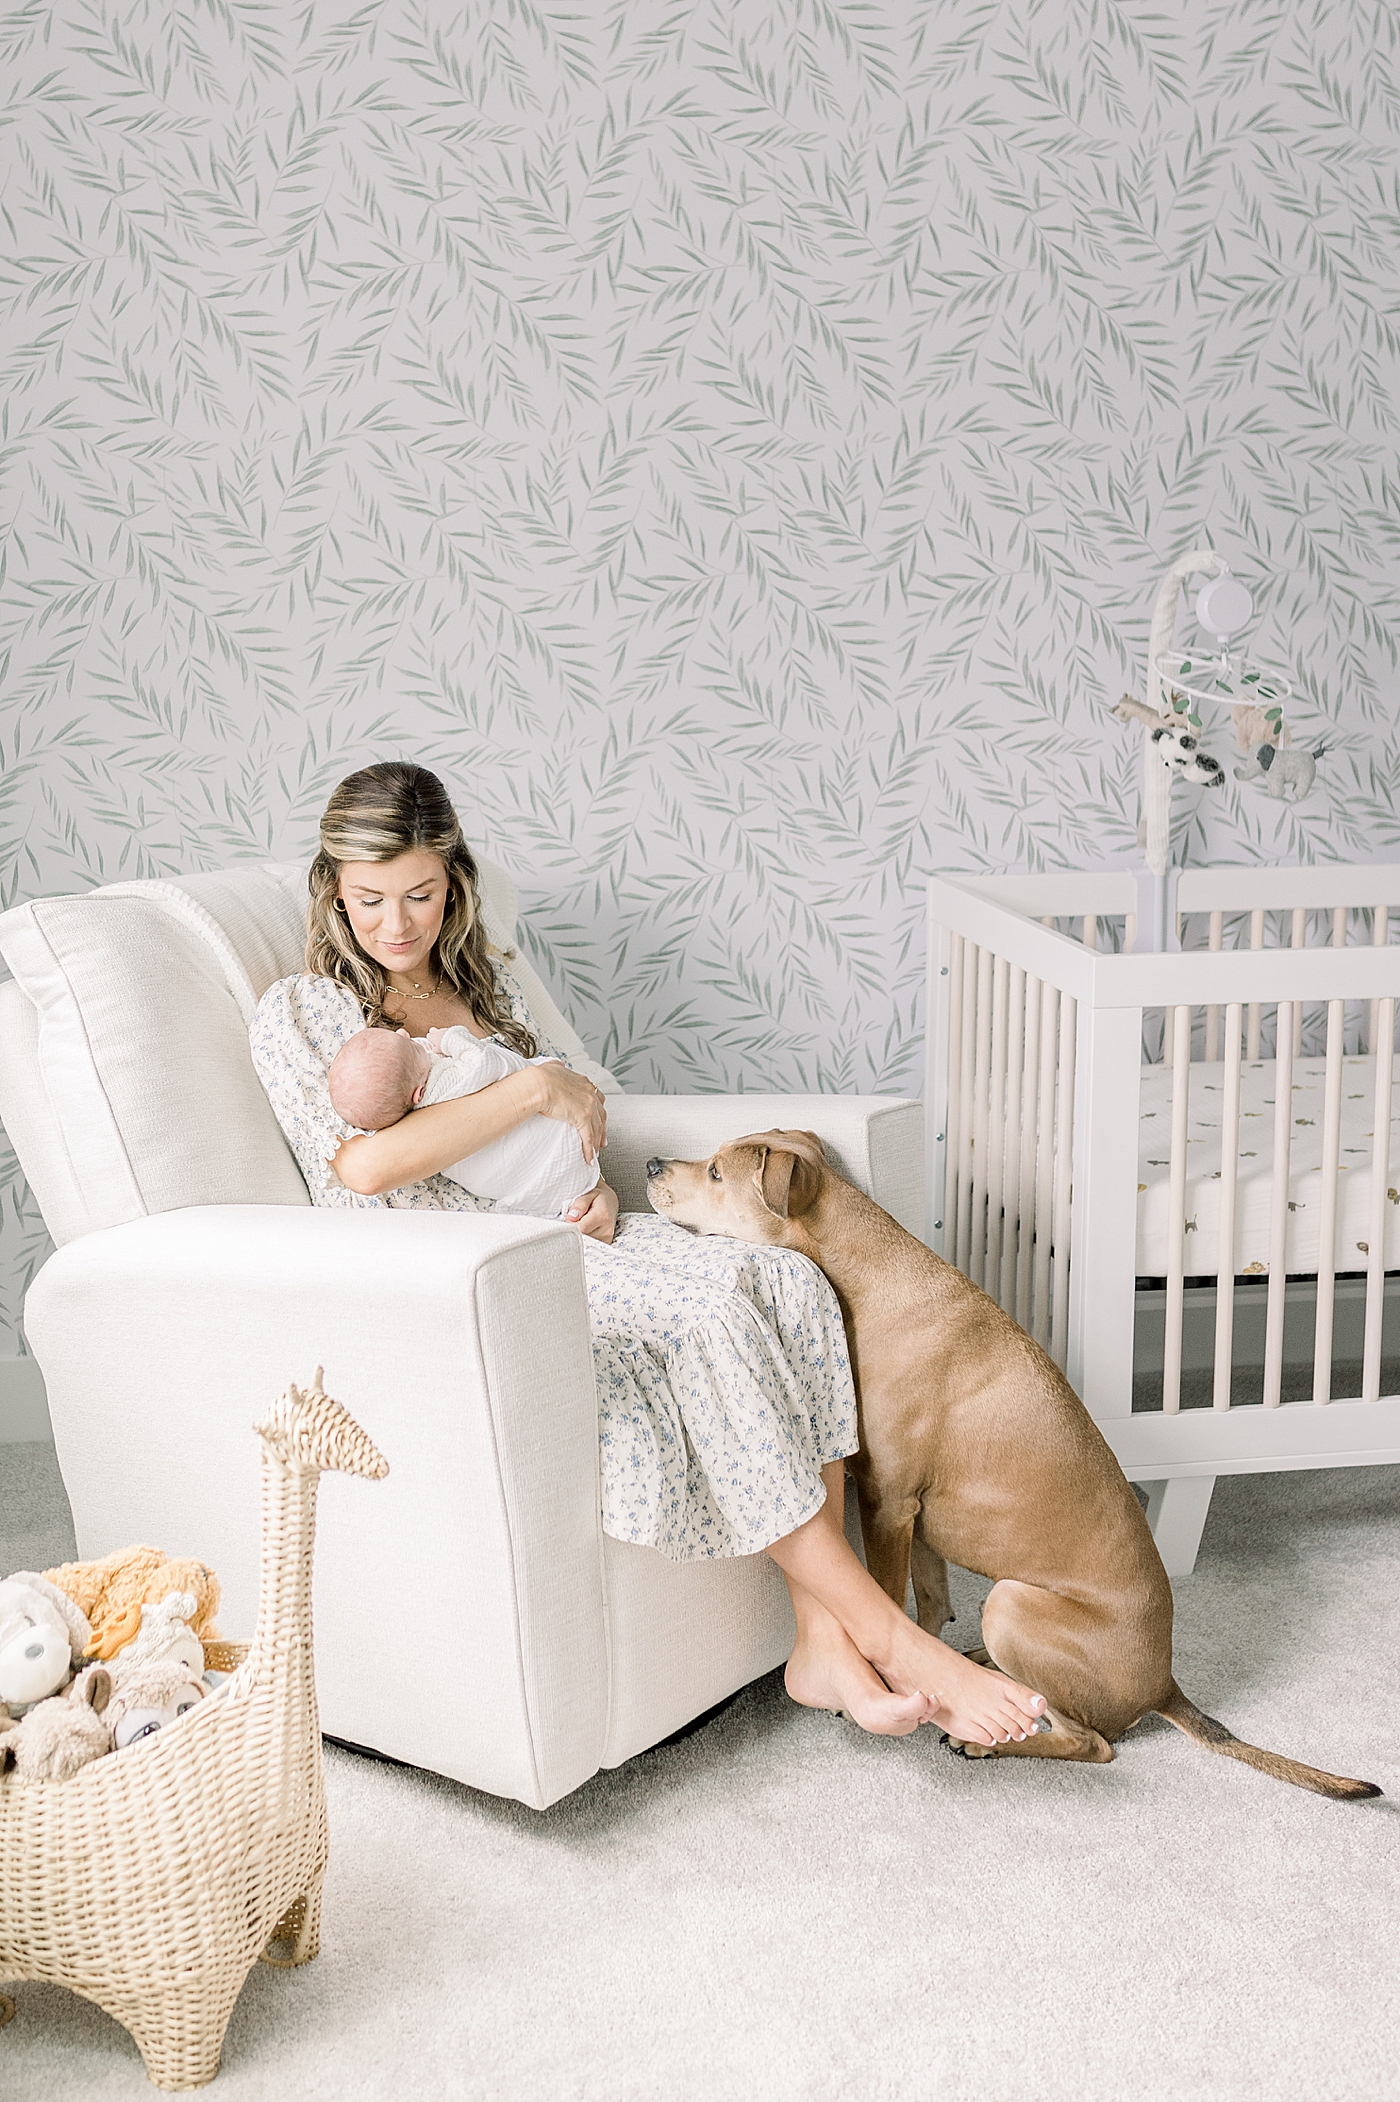 Mom holding baby sitting in glider while dog looks on | Baby Boy Newborn Photos CHS by Caitlyn Motycka Photography